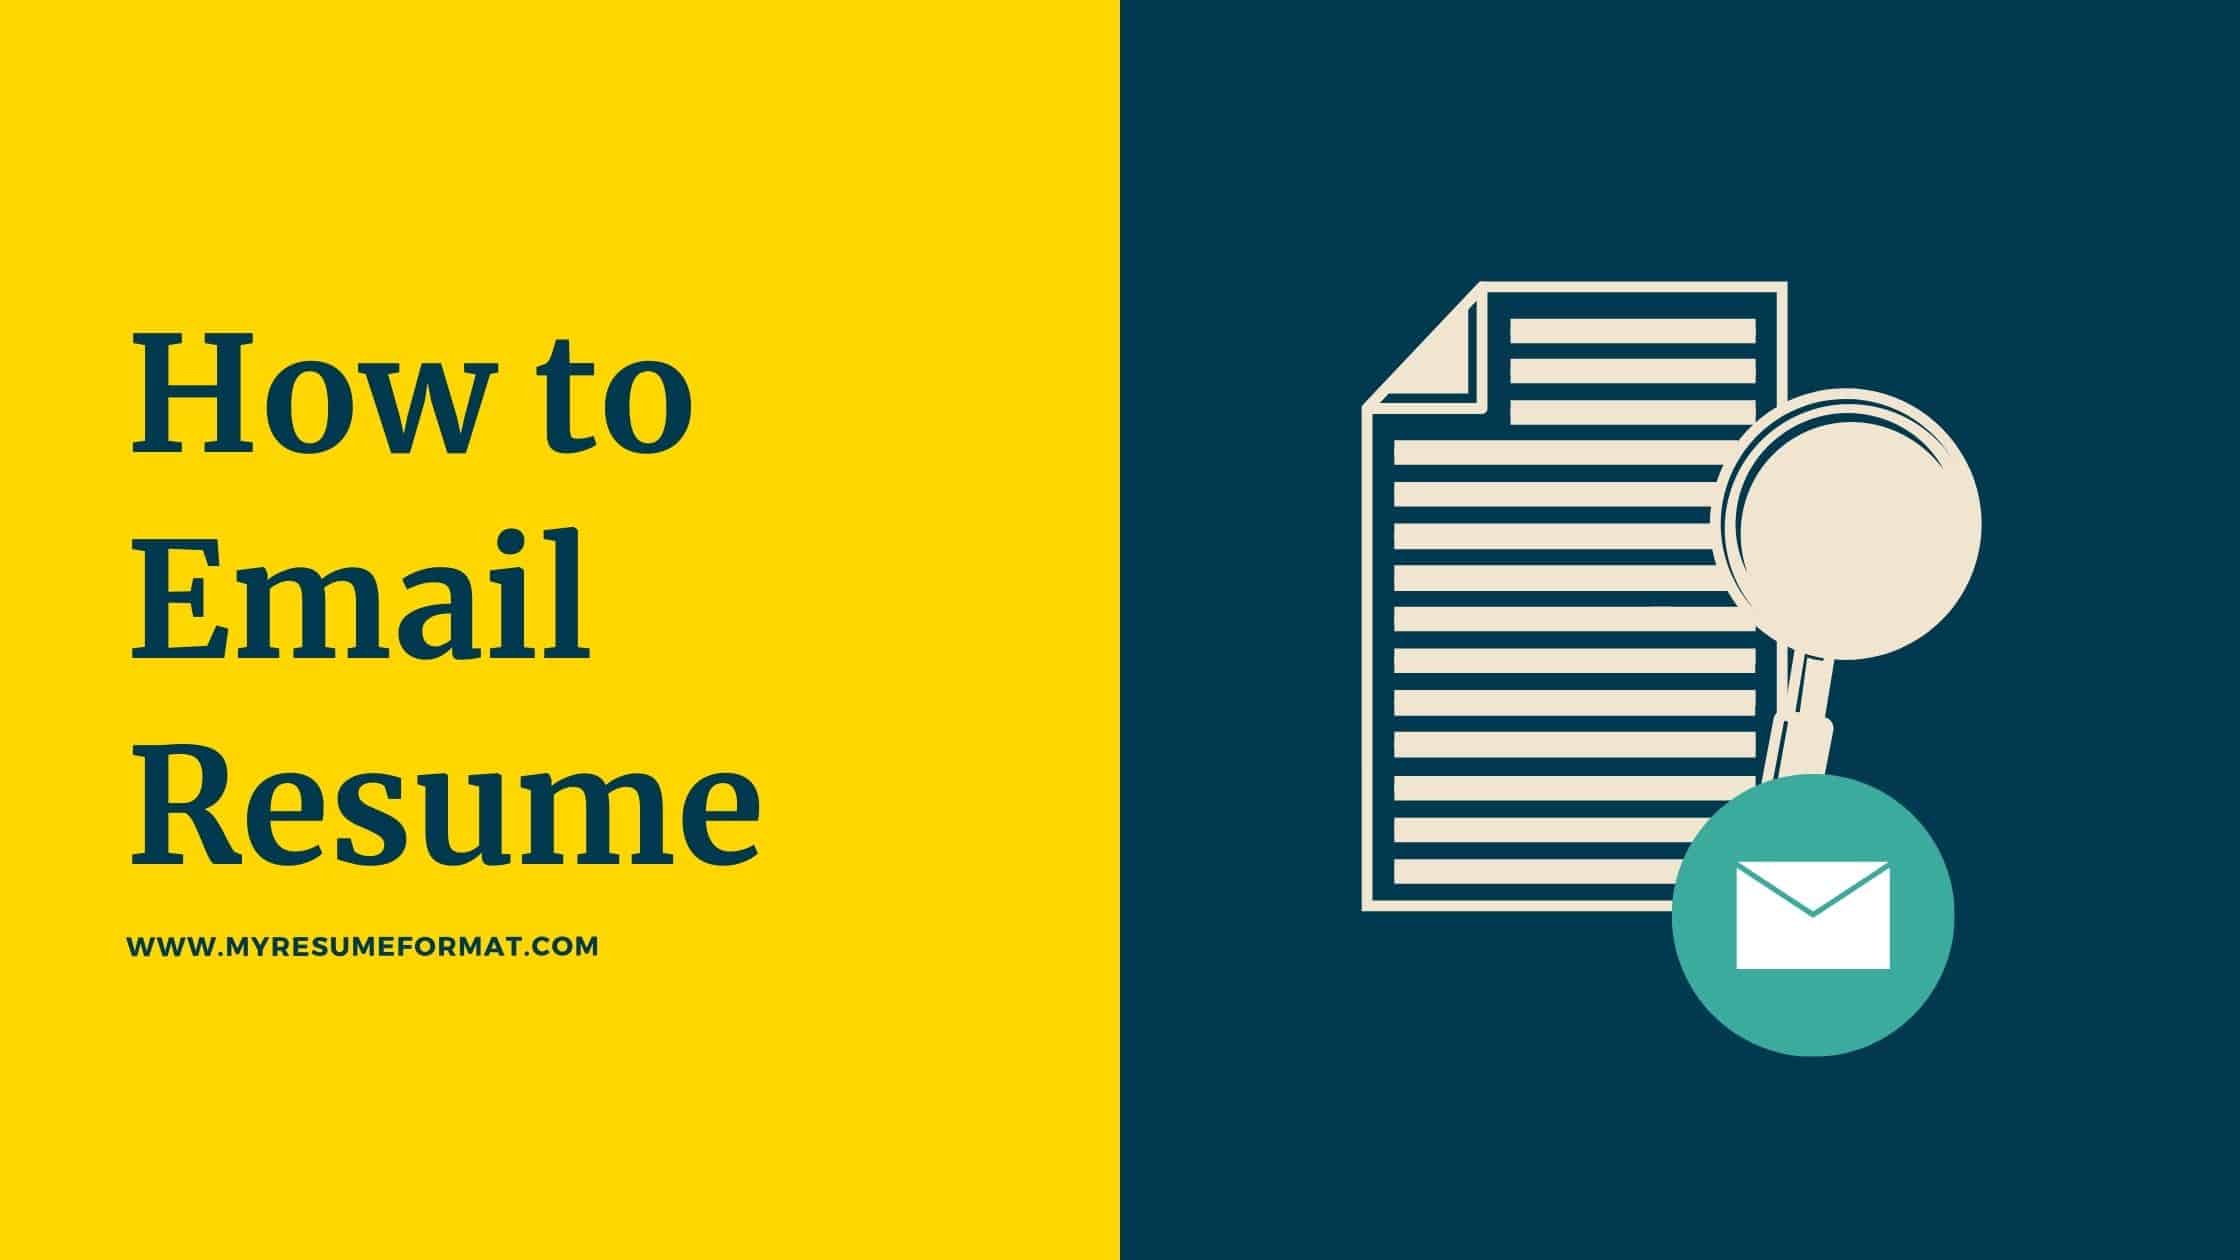 how to email a resume